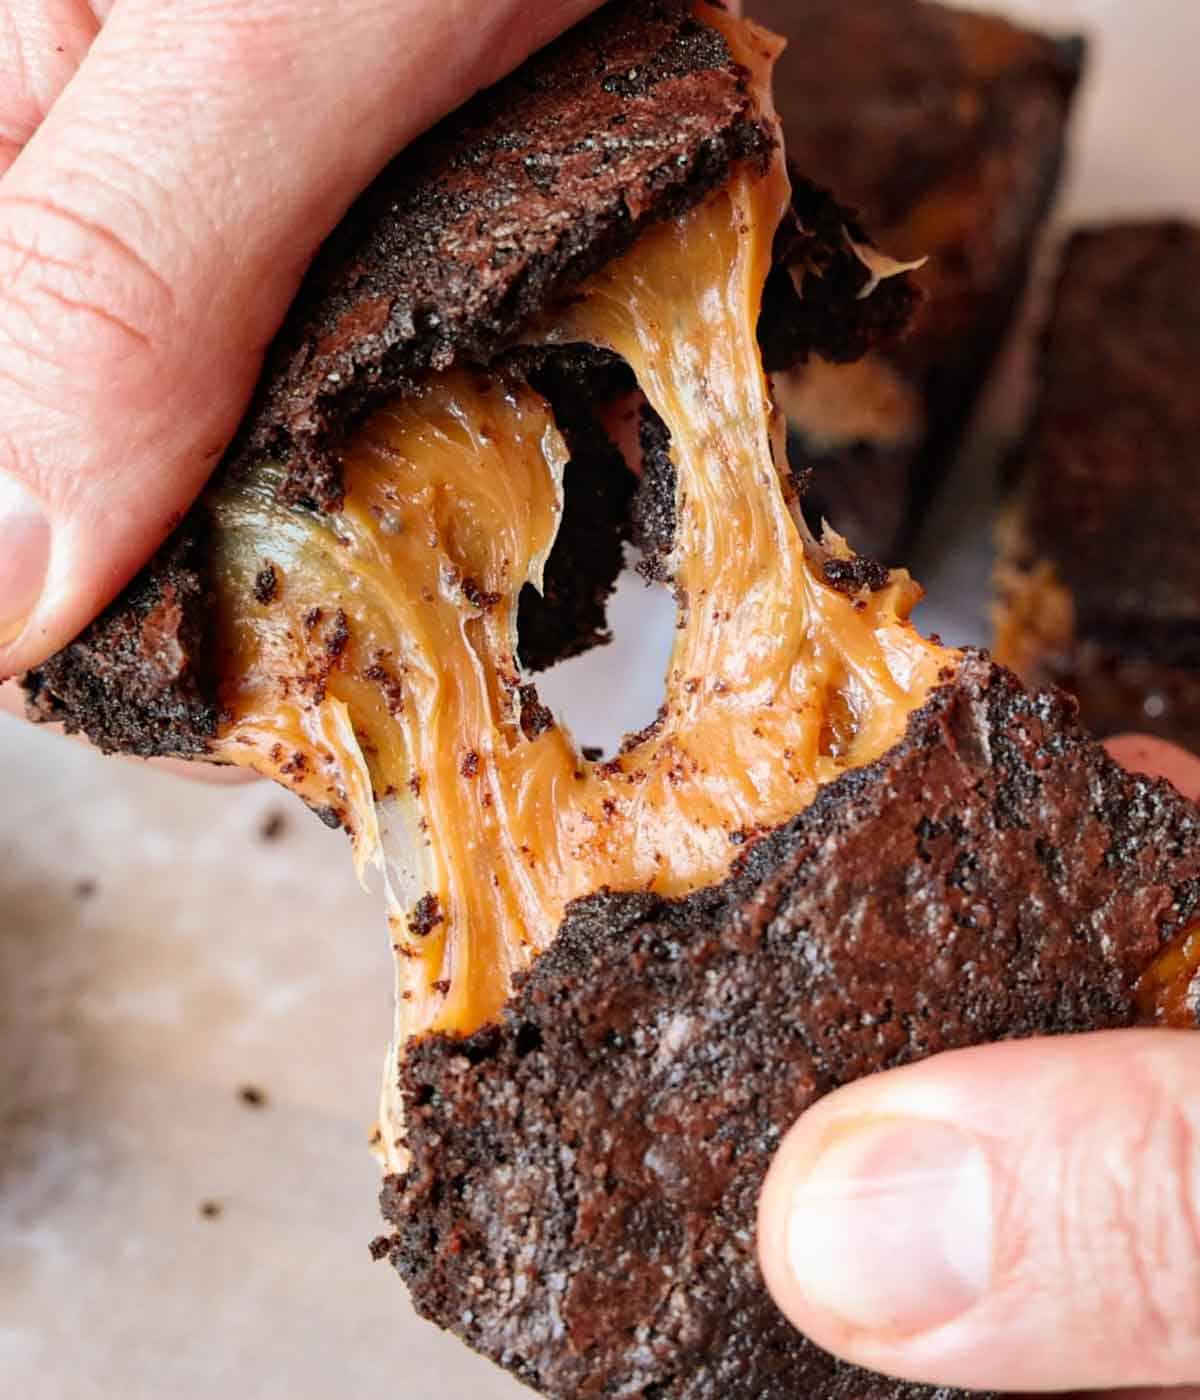 A piece of caramel brownie pulled apart, showing the melty caramel center caramel pulling apart.